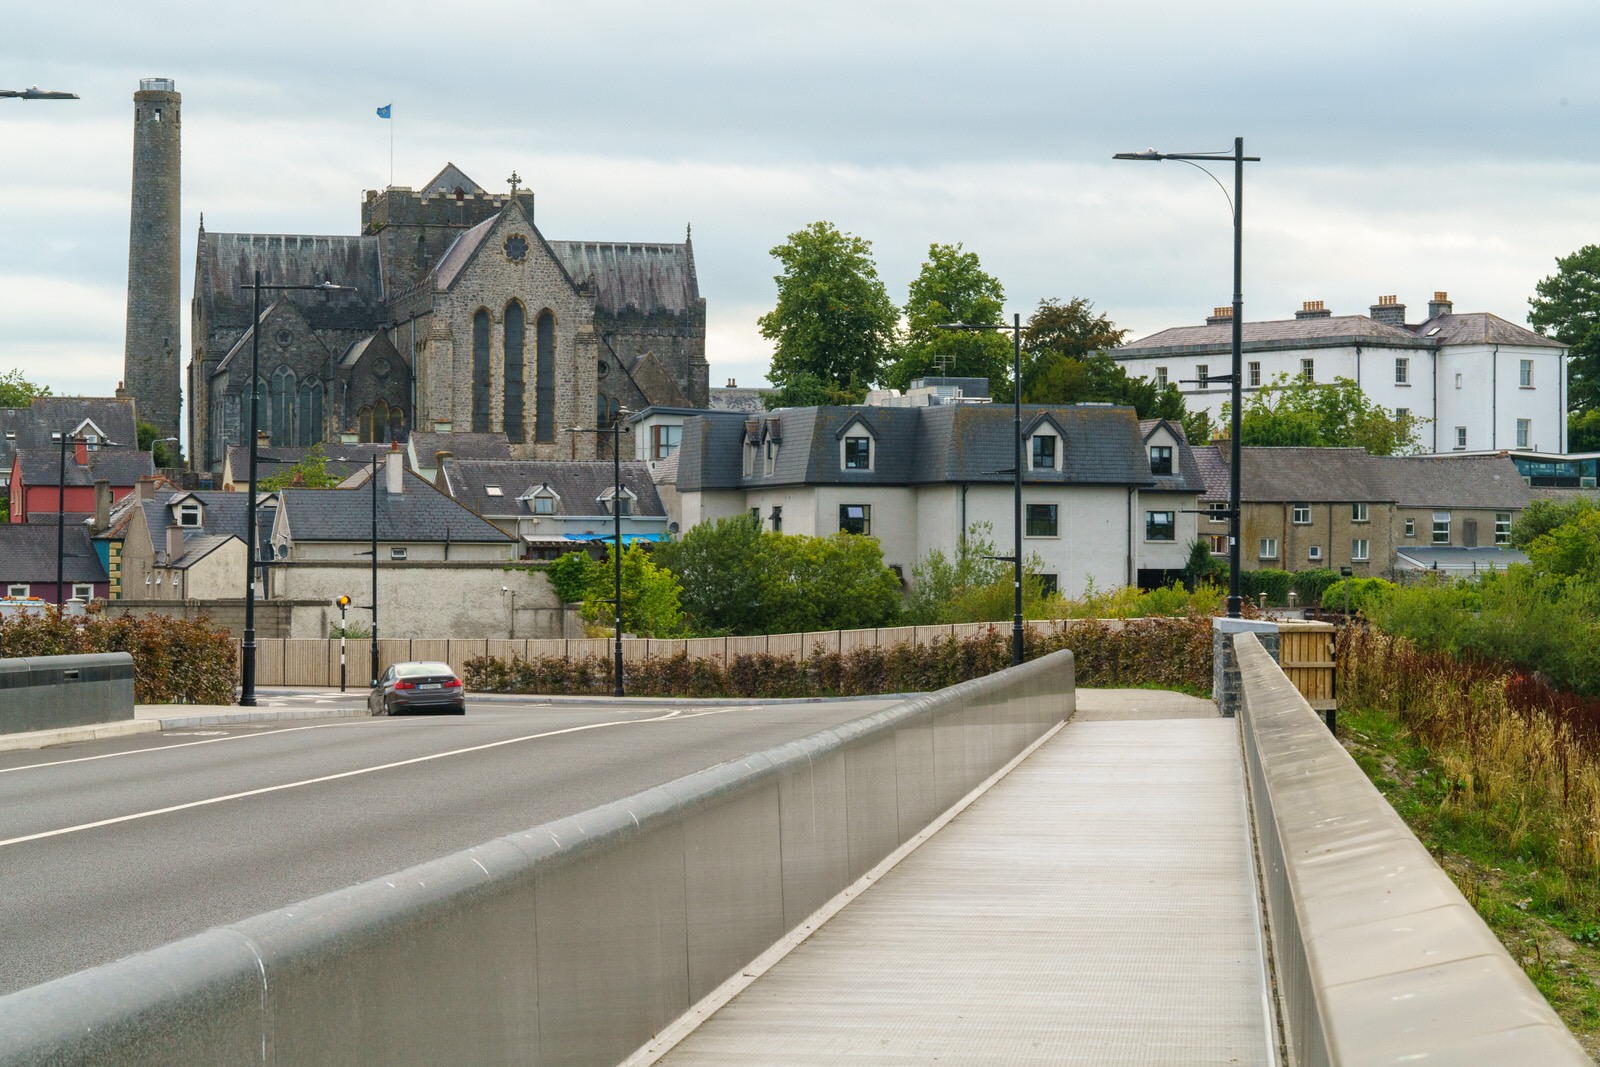 THE NEW ST FRANCIS BRIDGE IN KILKENNY AND THE SURROUNDING AREA [OPENED TO THE PUBLIC IN 2017]-227044-1